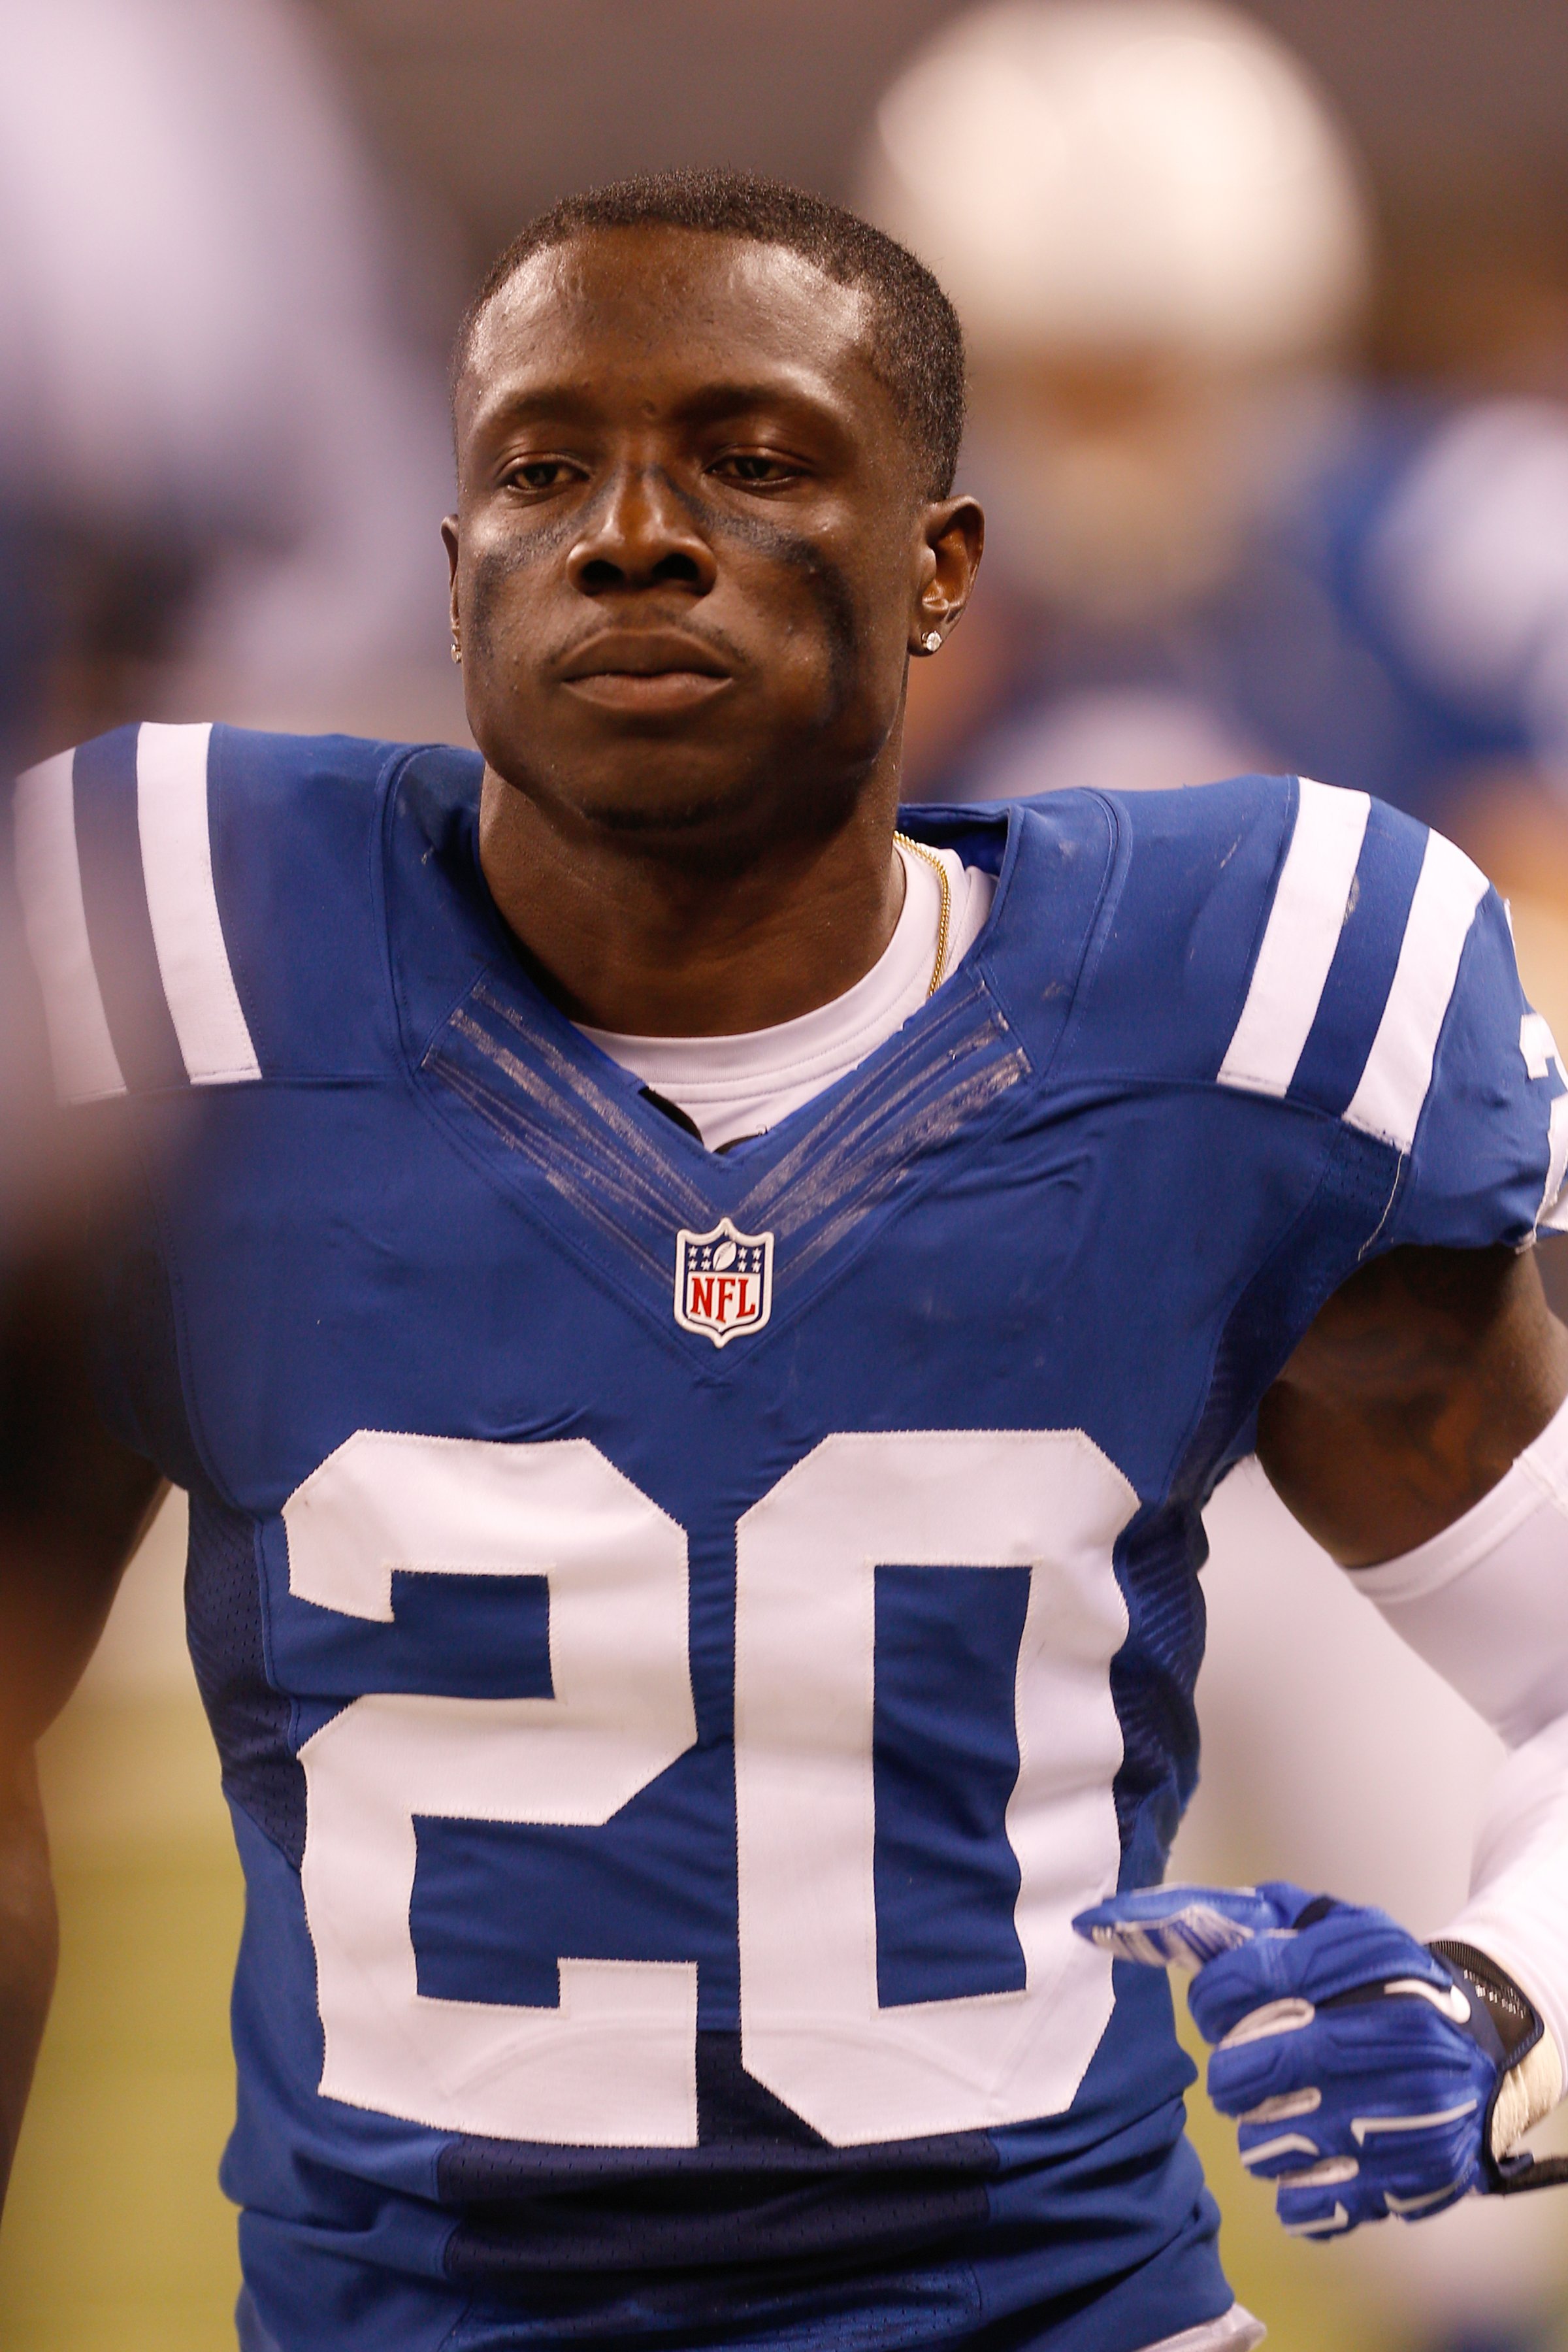 Indianapolis Colts cornerback Darius Butler looks on from the sidelines during the game against the Philadelphia Eagles in Indianapolis on Sept. 15, 2014.